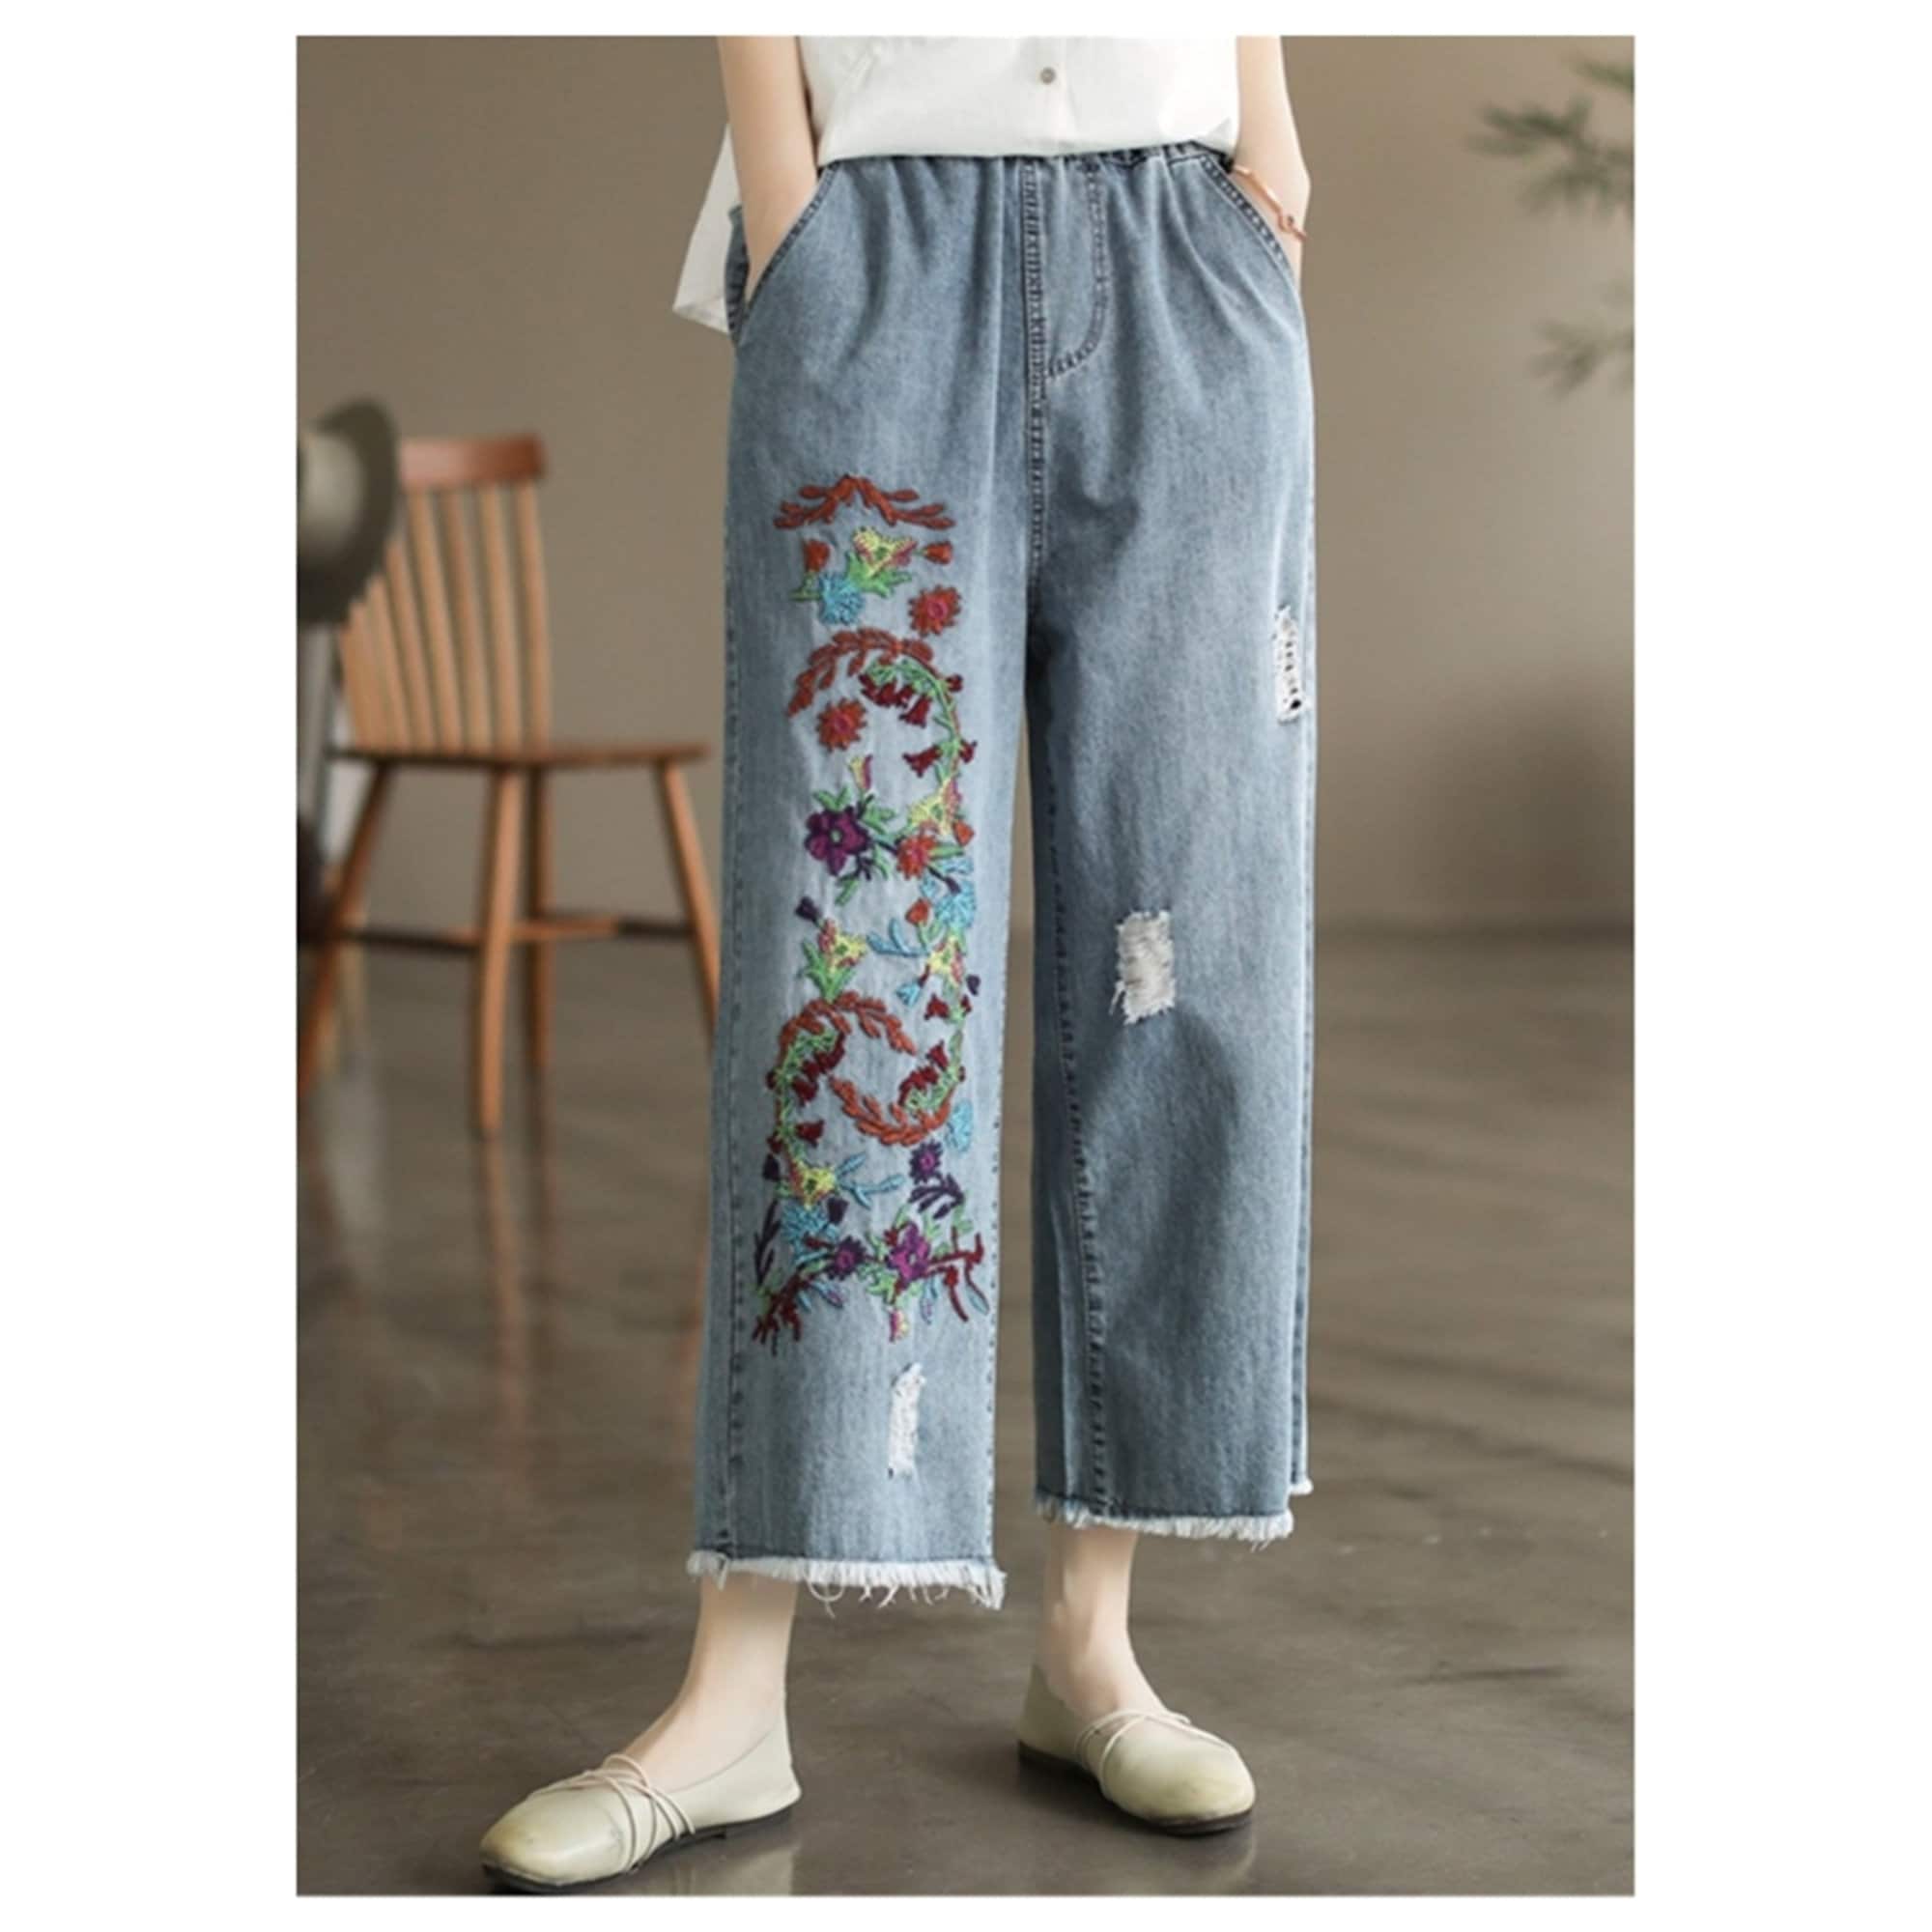 Embroidered Pattern Women's Clothing Spicy Girl Style Gradient Printed Low  Waisted Short Jean Pants for Women Summer Grey at Amazon Women's Jeans store